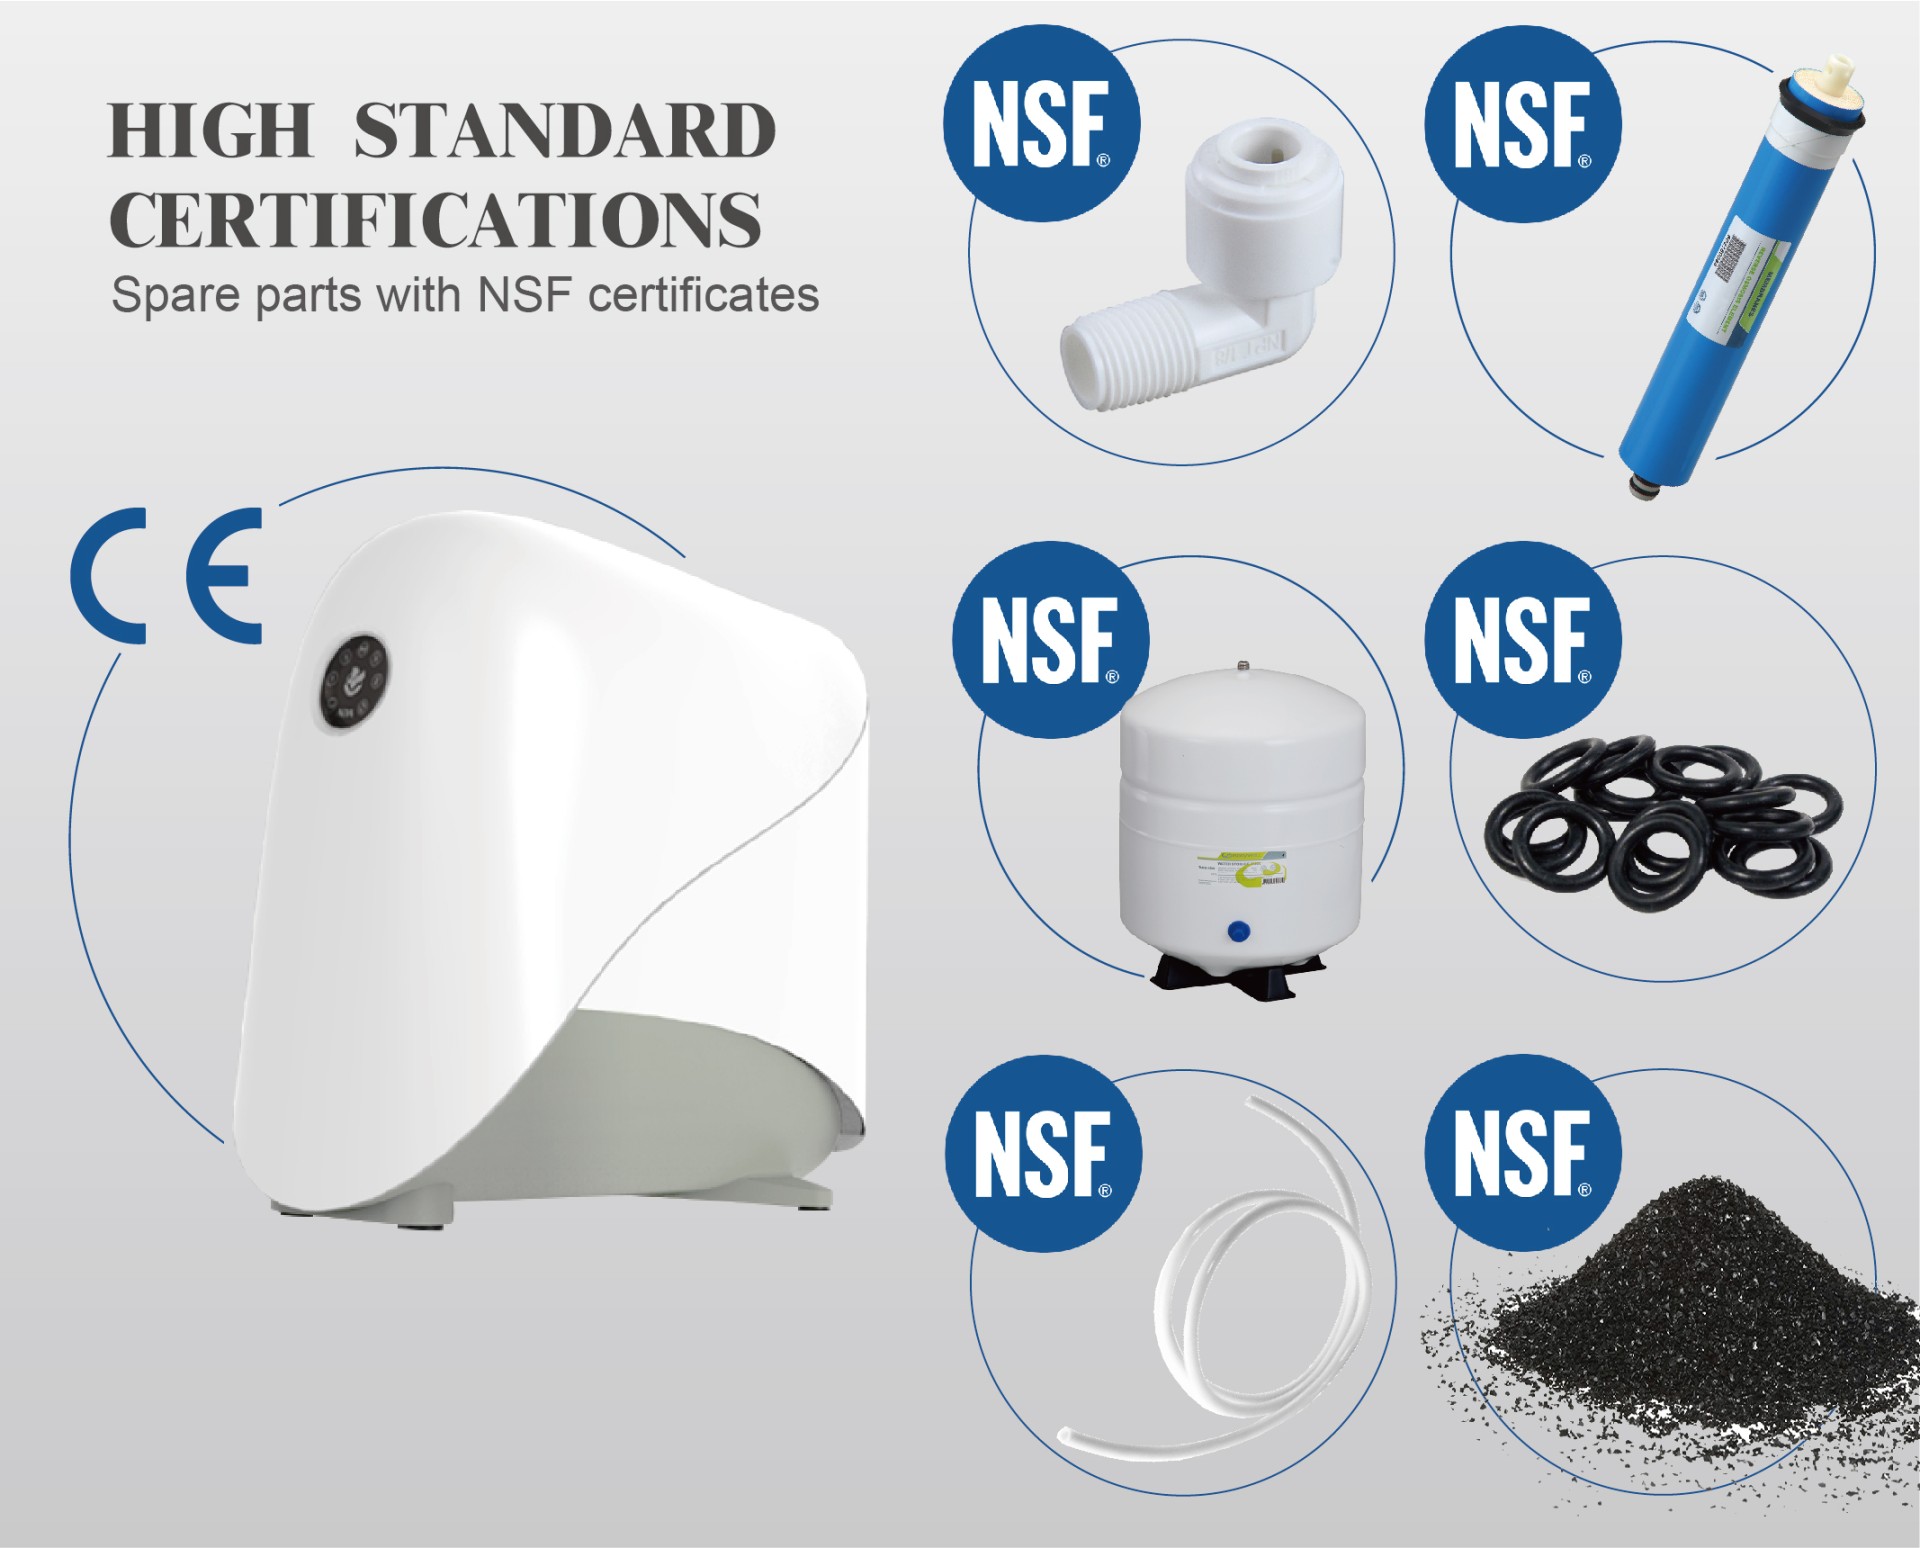 HIGH STANDARD CERTIFICATIONS Spare parts with NSF certificates